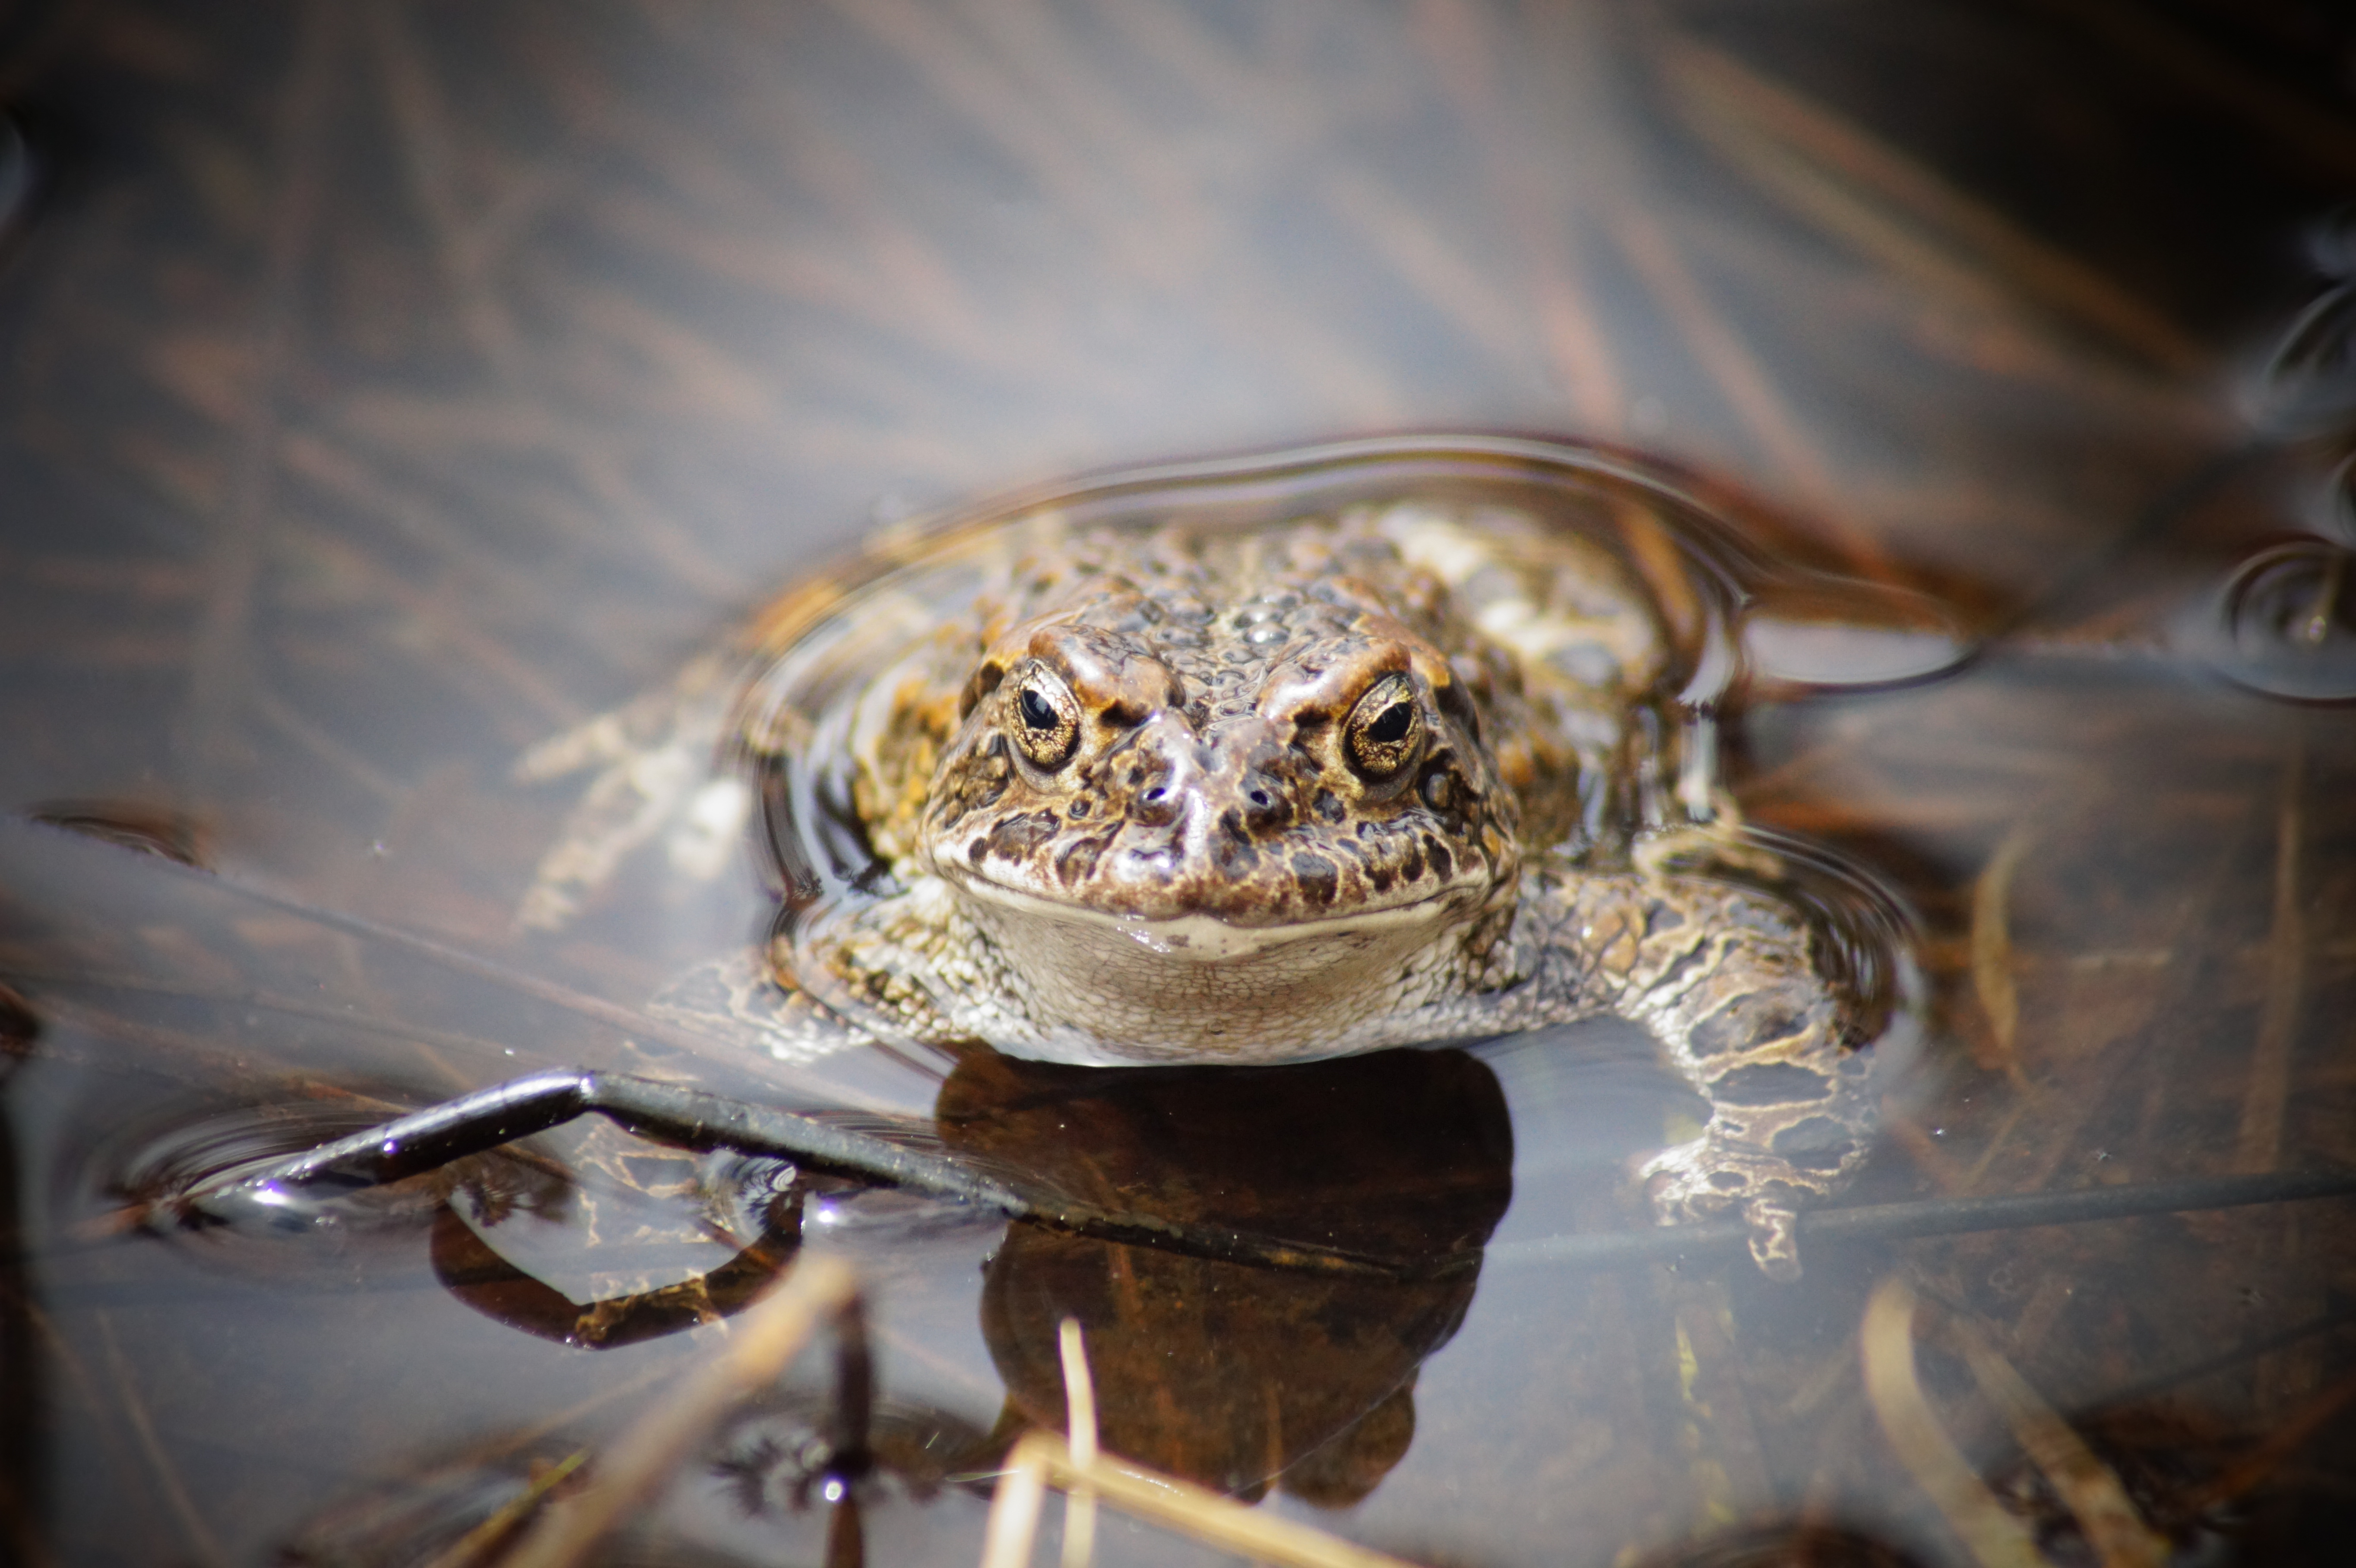 an olive green toad sits half submerged in water